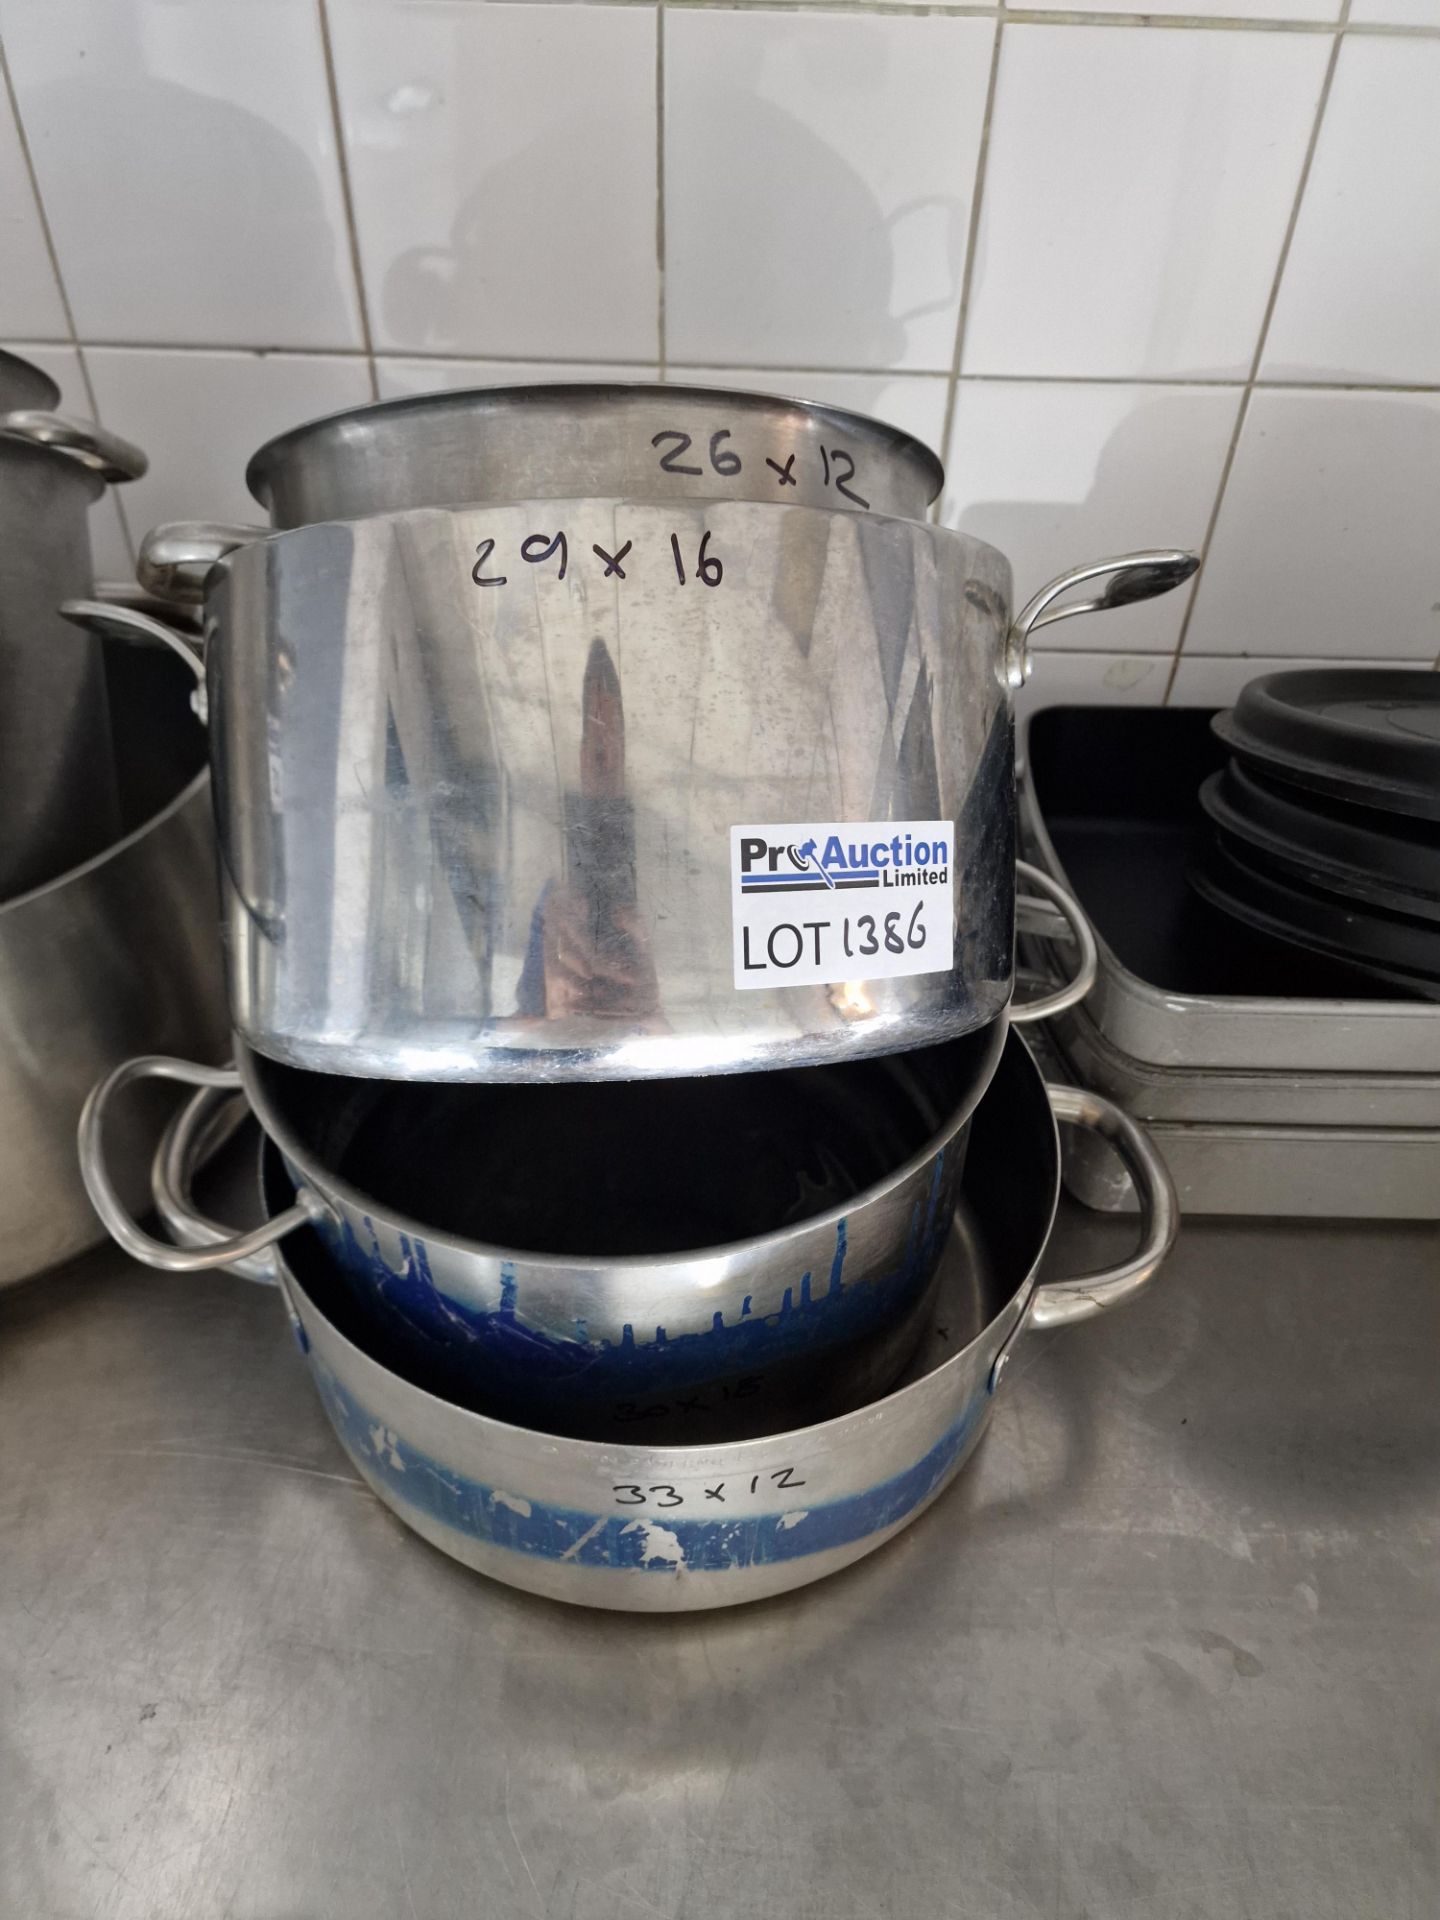 4 x Stainless Steel Commercial Stock Pots 33 x 12cm, 29 x 16cm, 26 x 12cm And 30 x 18cm